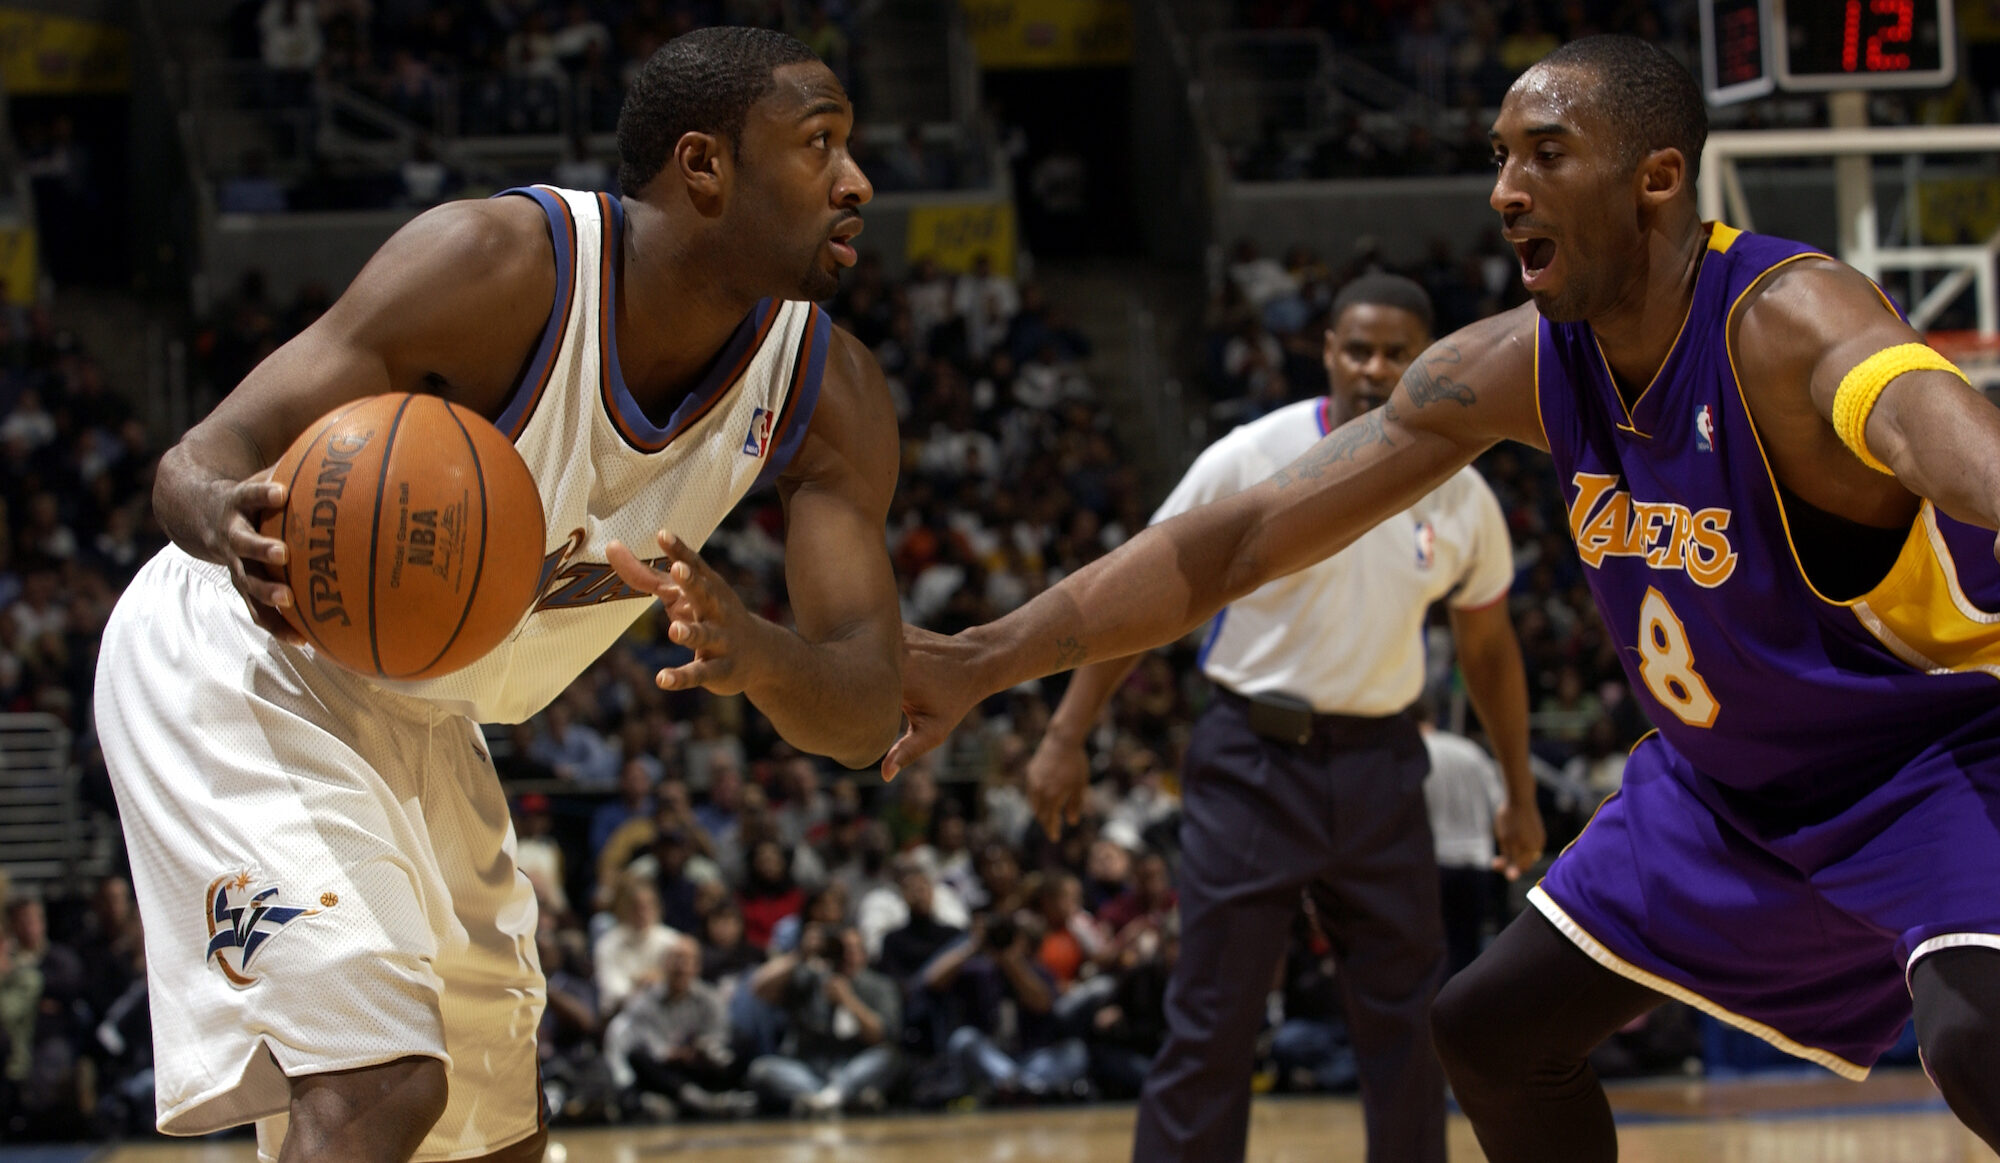 gilbert arenas says kobe bryant trained by taking 500 shots as if he was defended by raja bell